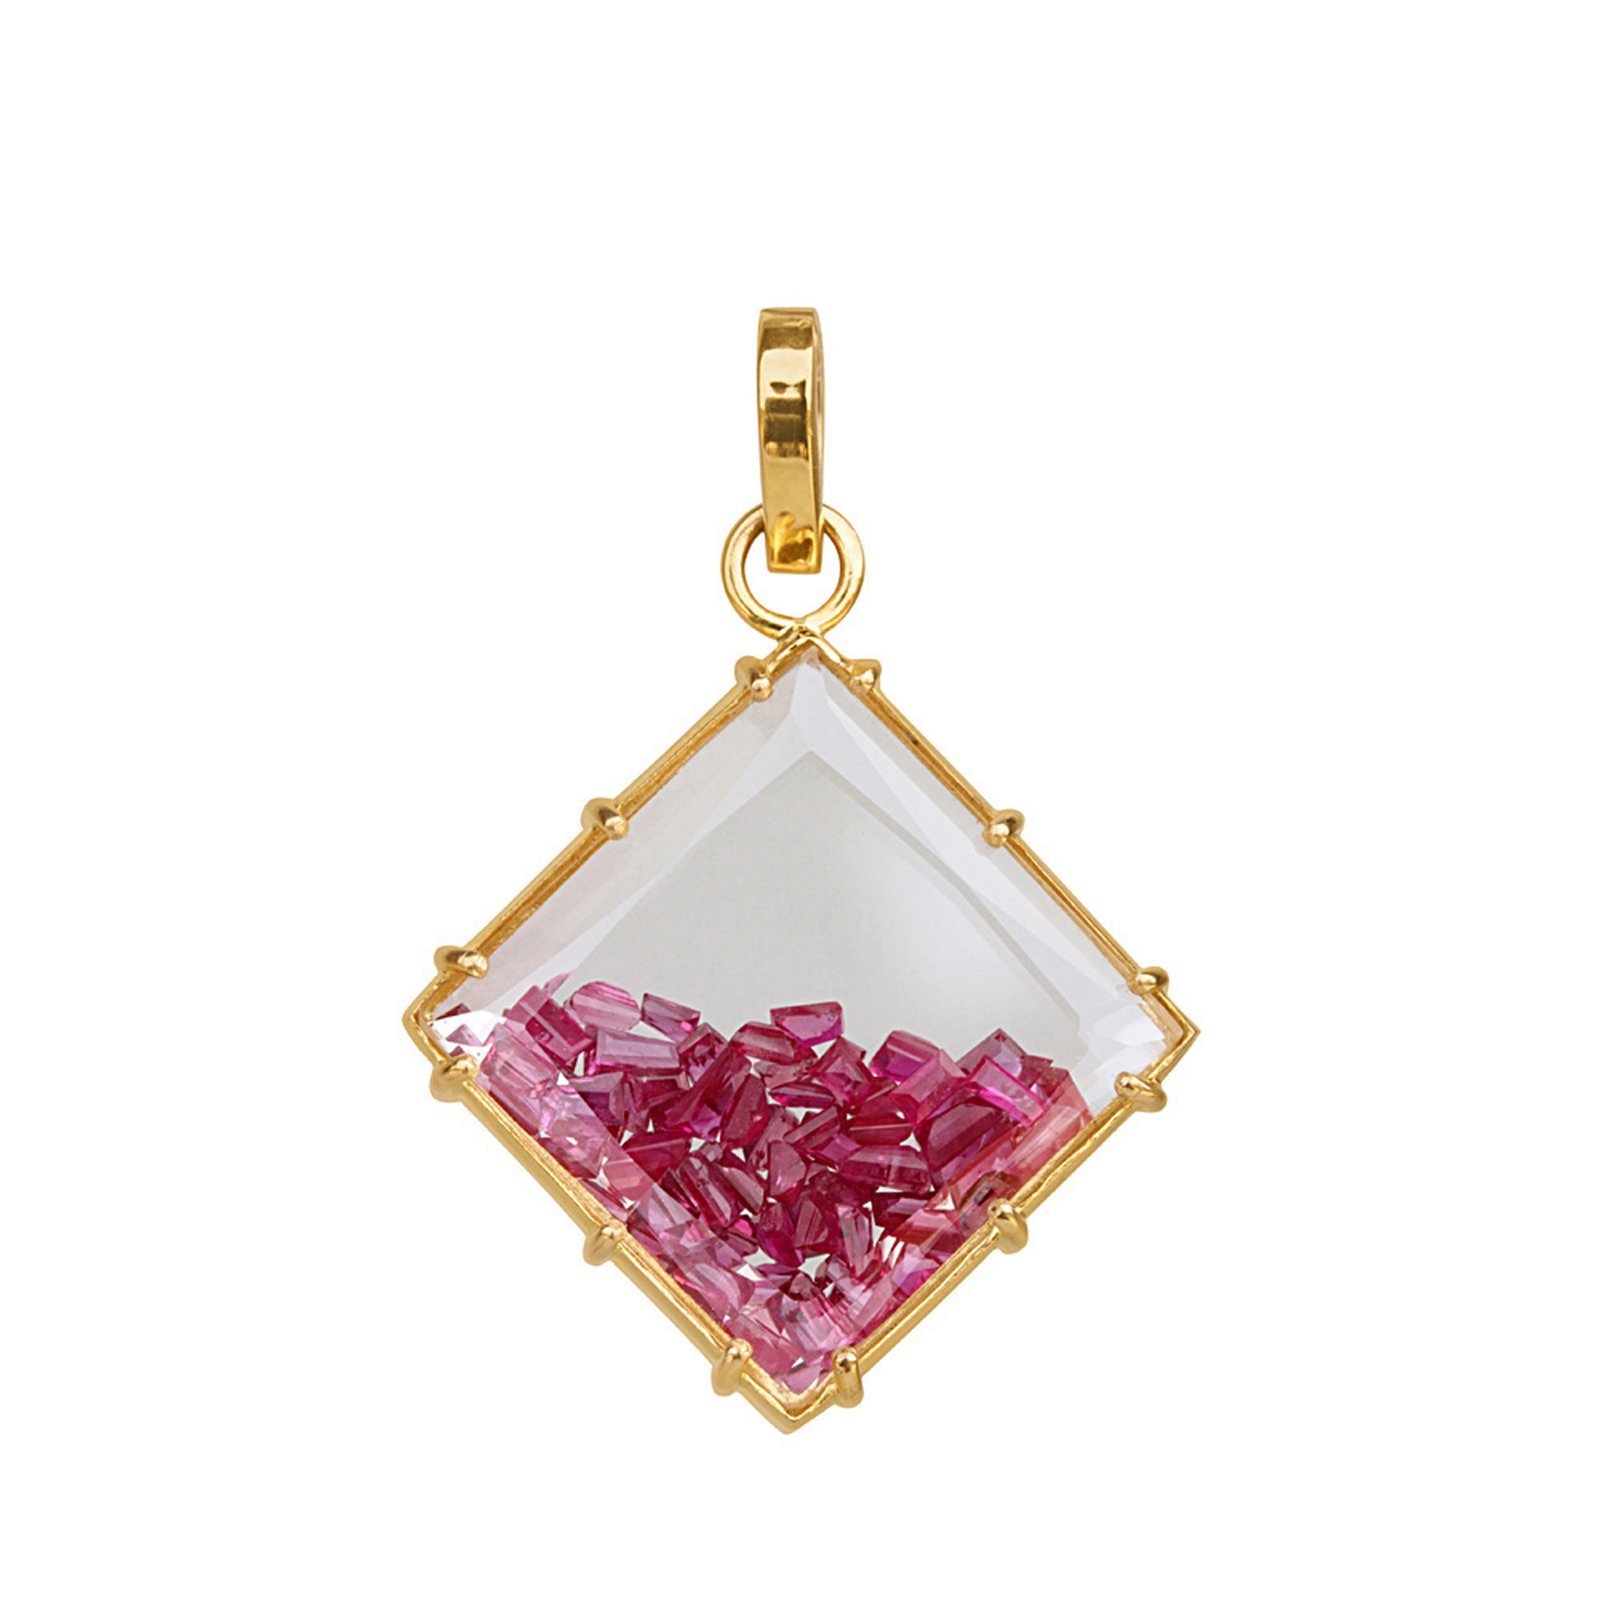 18k solid gold crystal shaker pendant with loose ruby